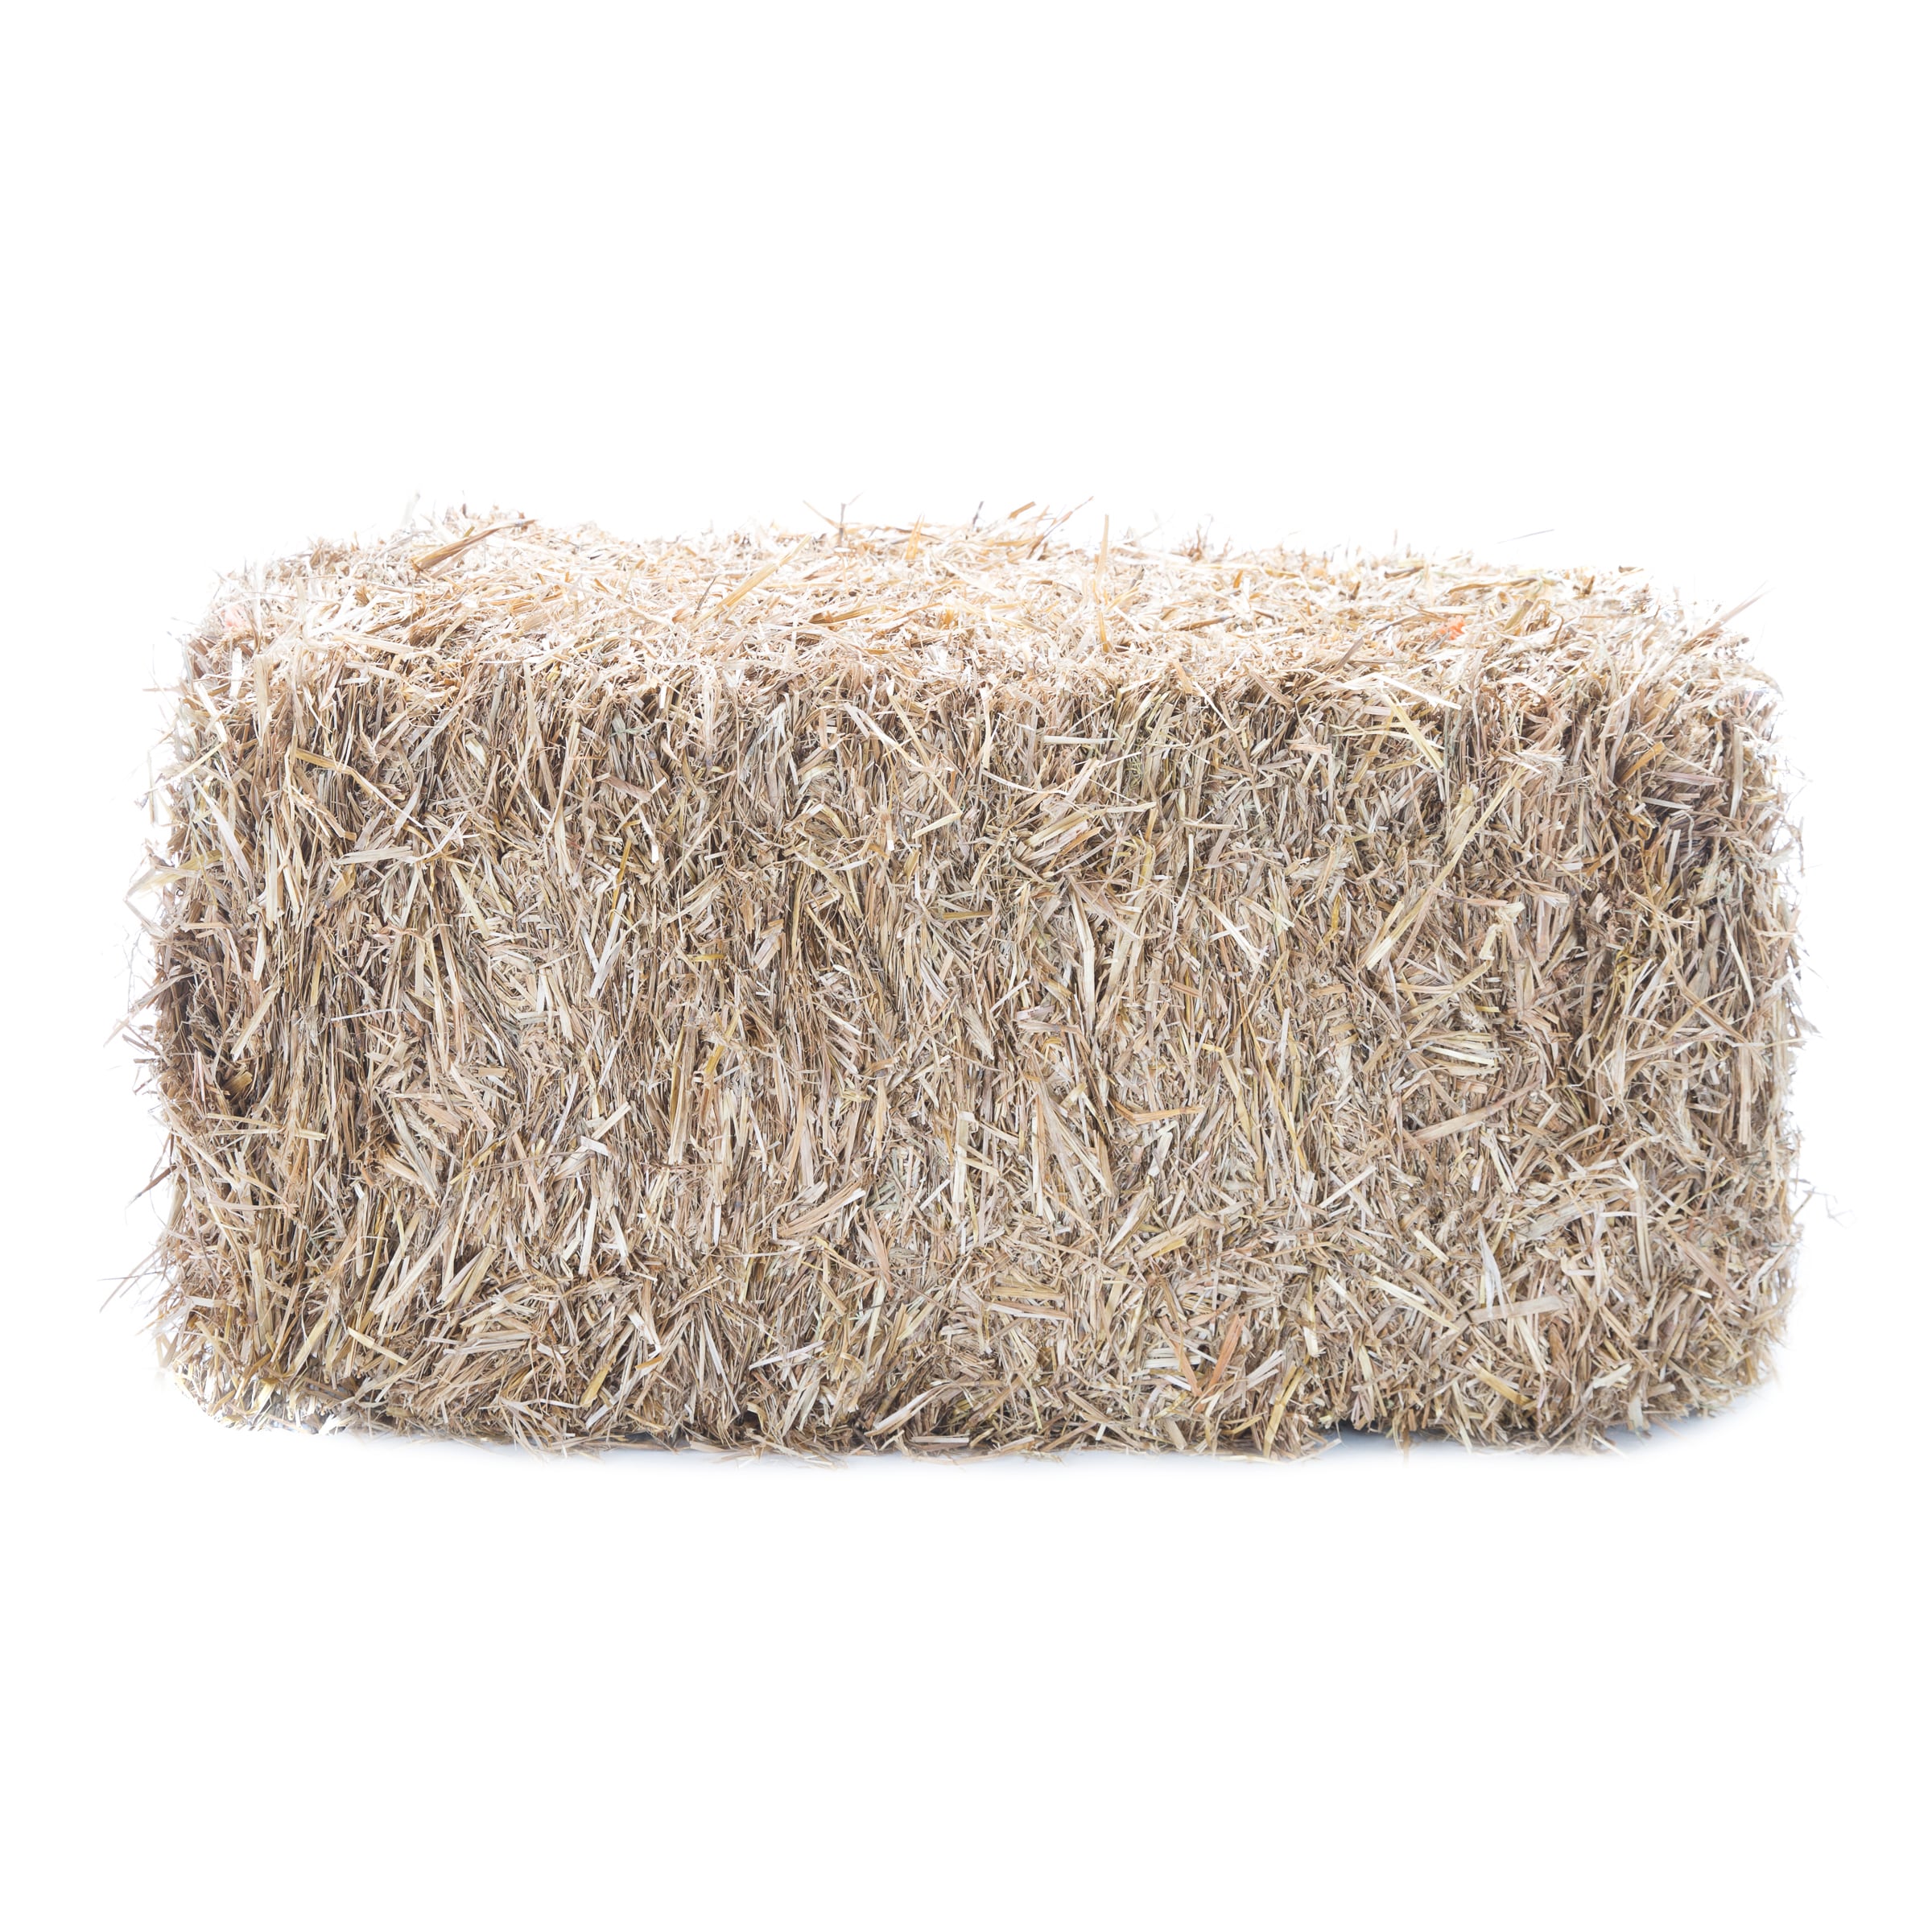 Wheat Straw 80 sq. ft. (at 3-in to 4-in depth) in the Pine Needles